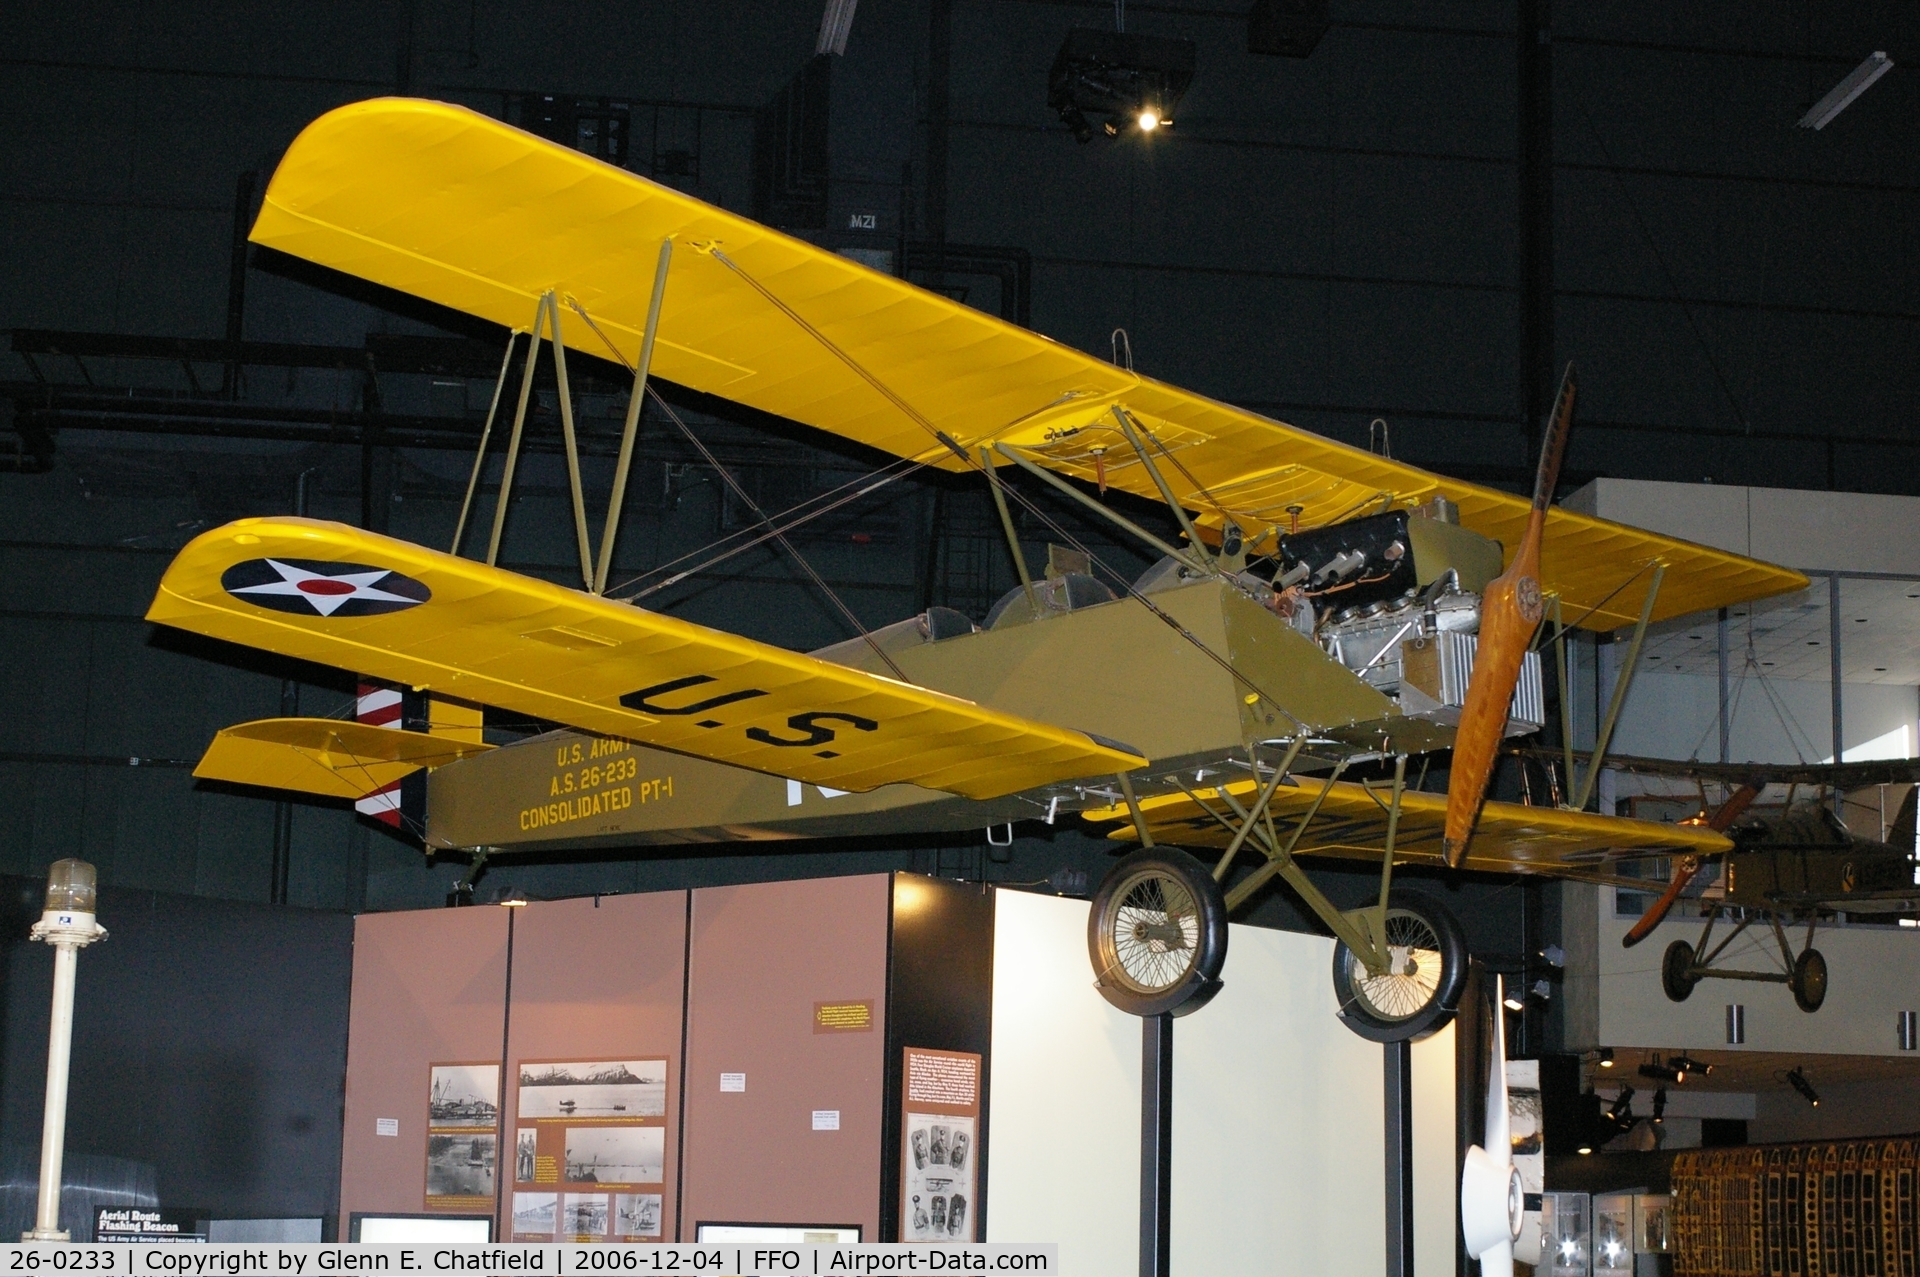 26-0233, 1926 Consolidated PT-1 Trusty C/N Not found 26-0233, PT-1 at the National Museum of the U.S. Air Force